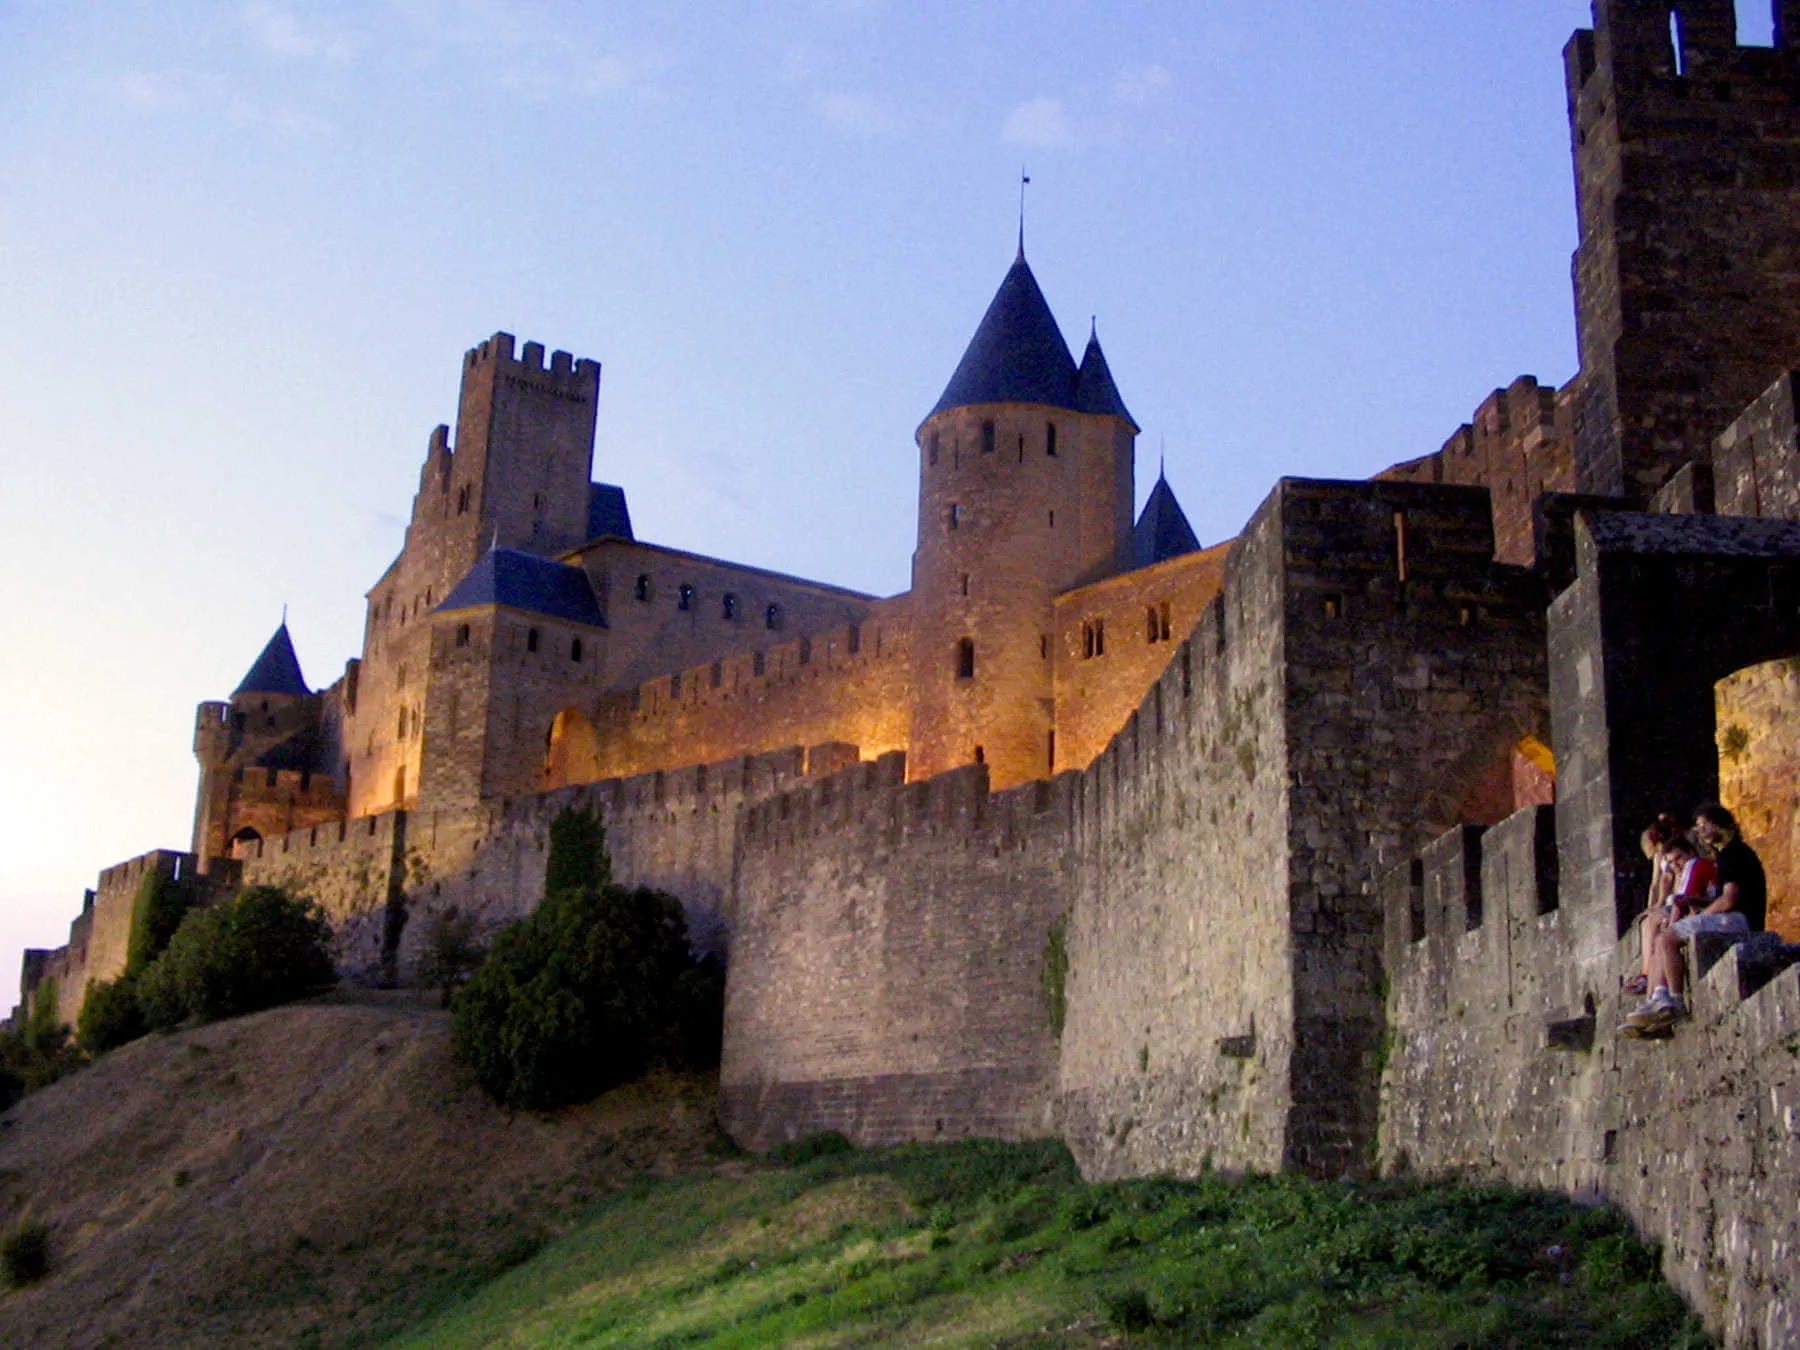 Carcassonne's double walls, turrets, and towers are best explored early or late, when the tide of tourists has turned